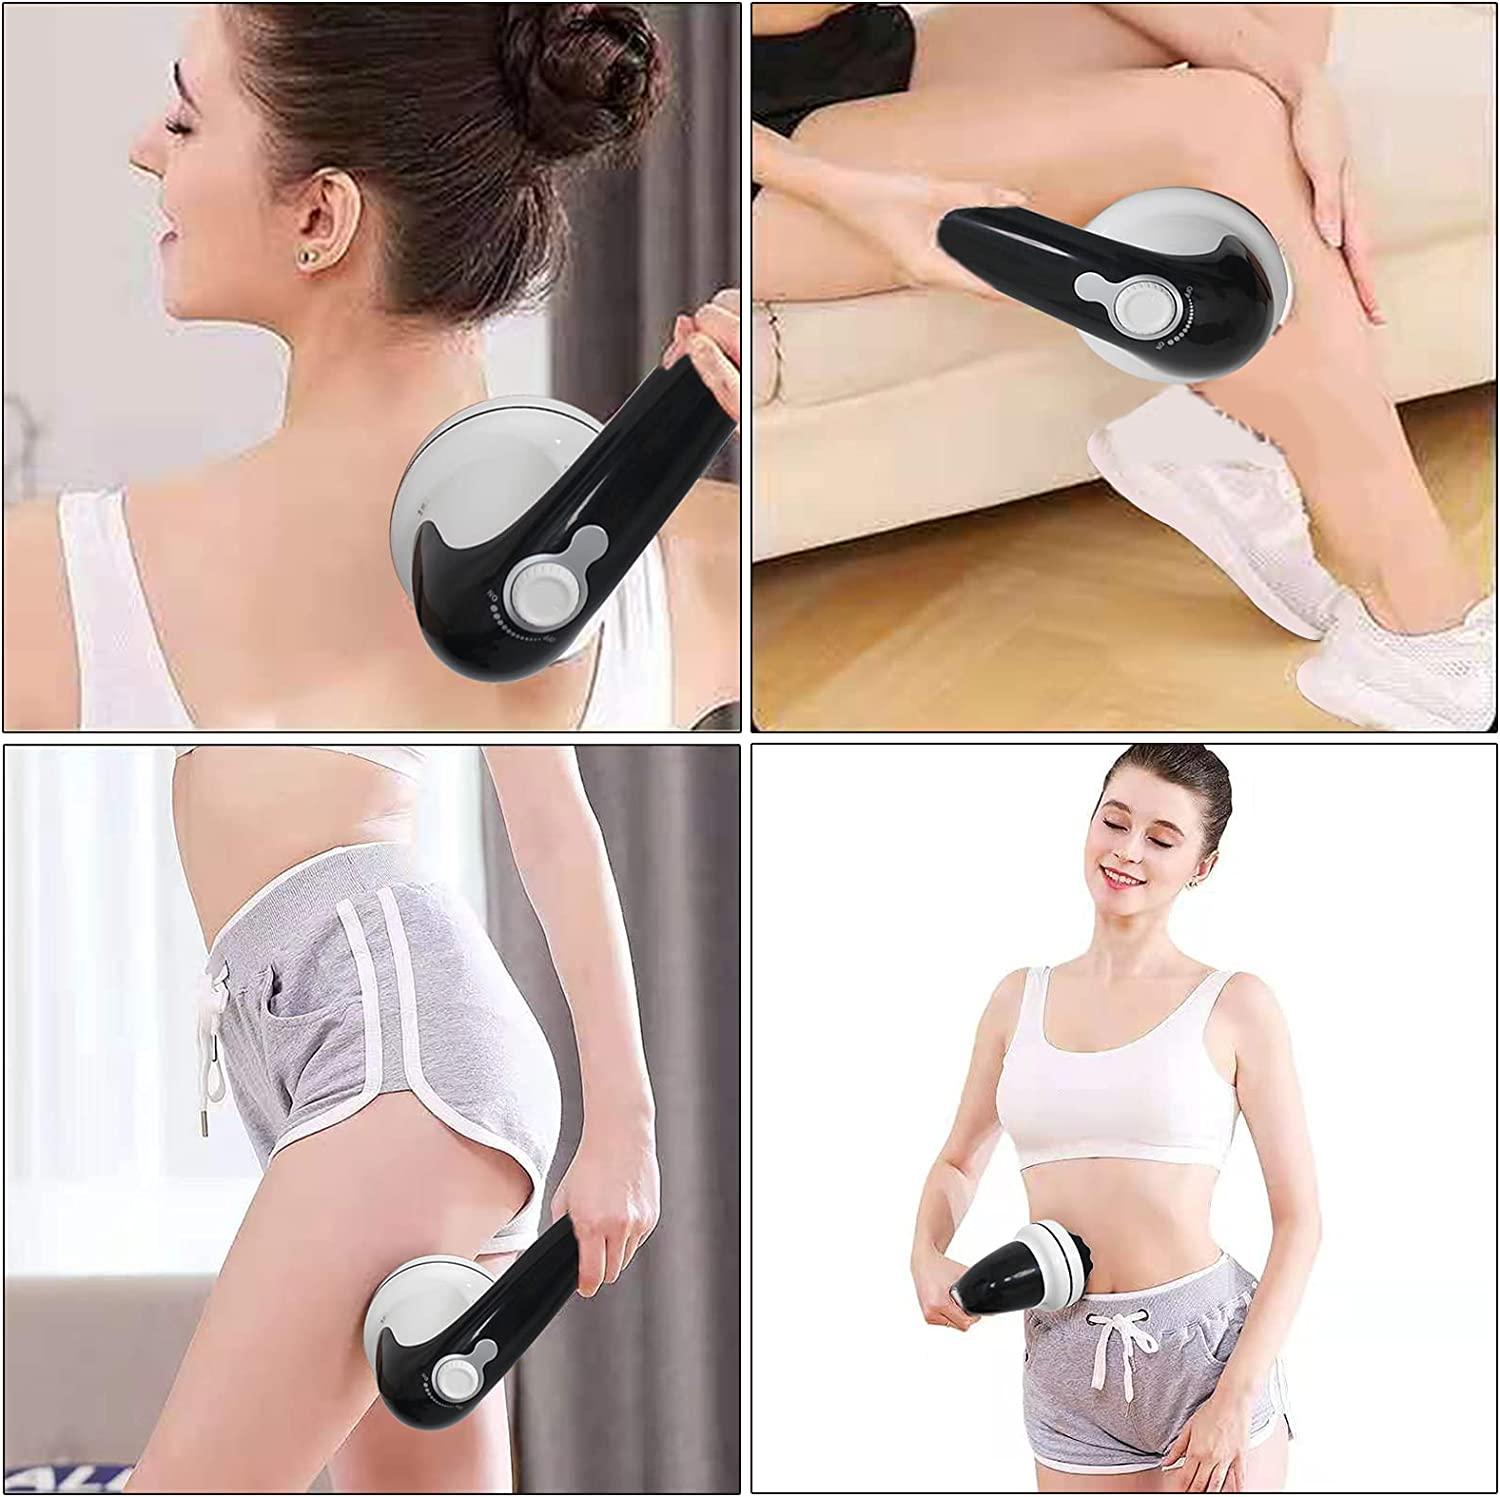 Handheld Cellulite Remover Electric Back Massager - Portable Anti